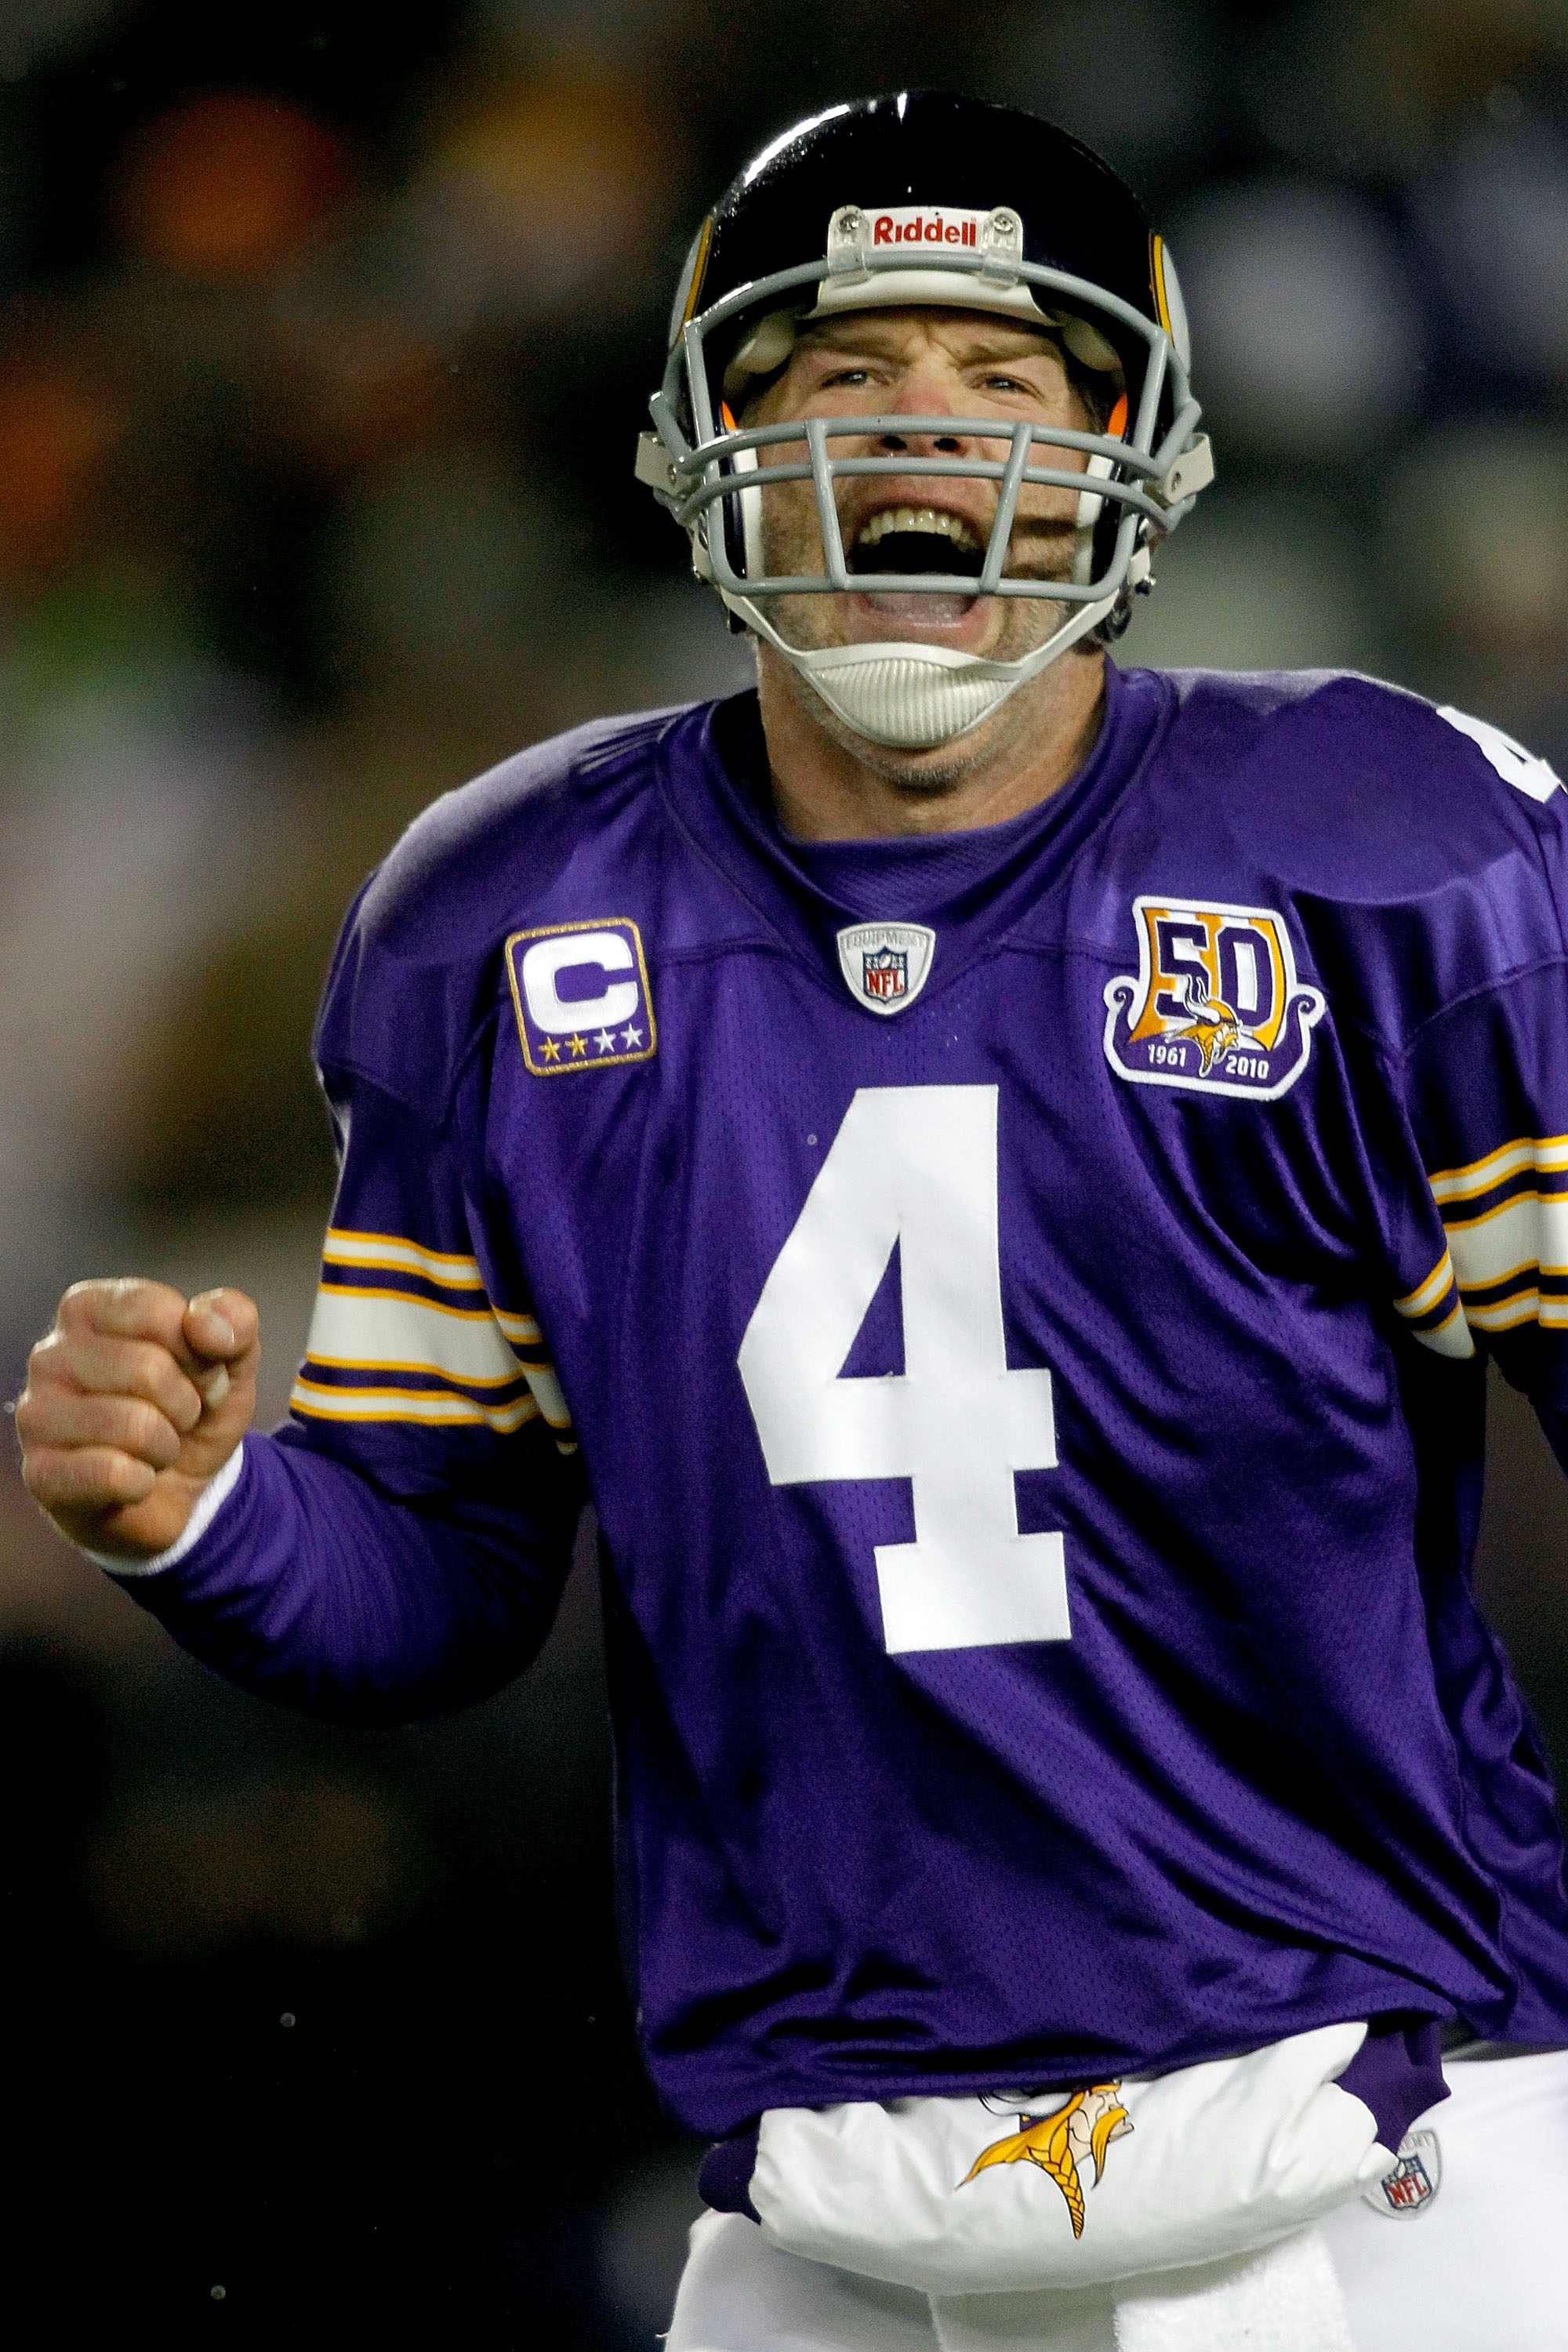 MINNEAPOLIS, MN - DECEMBER 20:  Quarterback Brett Favre of the Minnesota Vikings celebrates the Vikings first touchdown against the Chicago Bears at TCF Bank Stadium on December 20, 2010 in Minneapolis, Minnesota.  (Photo by Matthew Stockman/Getty Images)